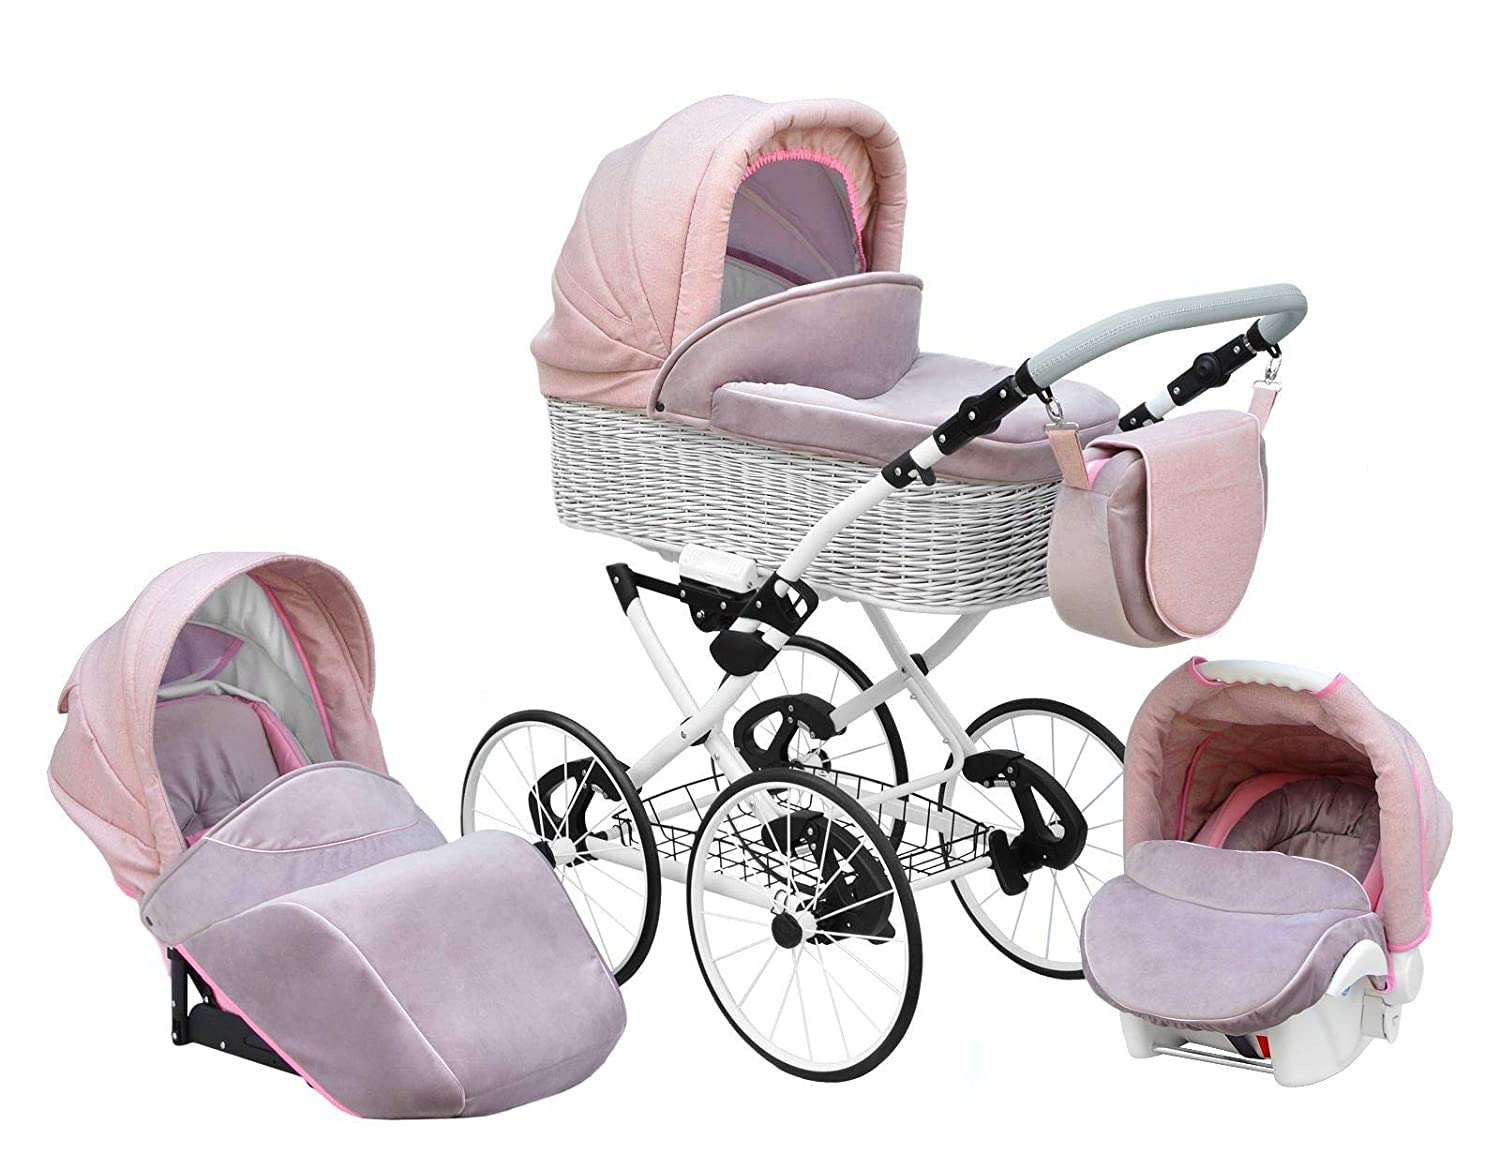 Lux4Kids Retro Pushchair Nature One Pro Puncture Free 27 Inch Spoke Wheels Wicker Basket Powder Kiss 03 3-in-1 with Baby Seat